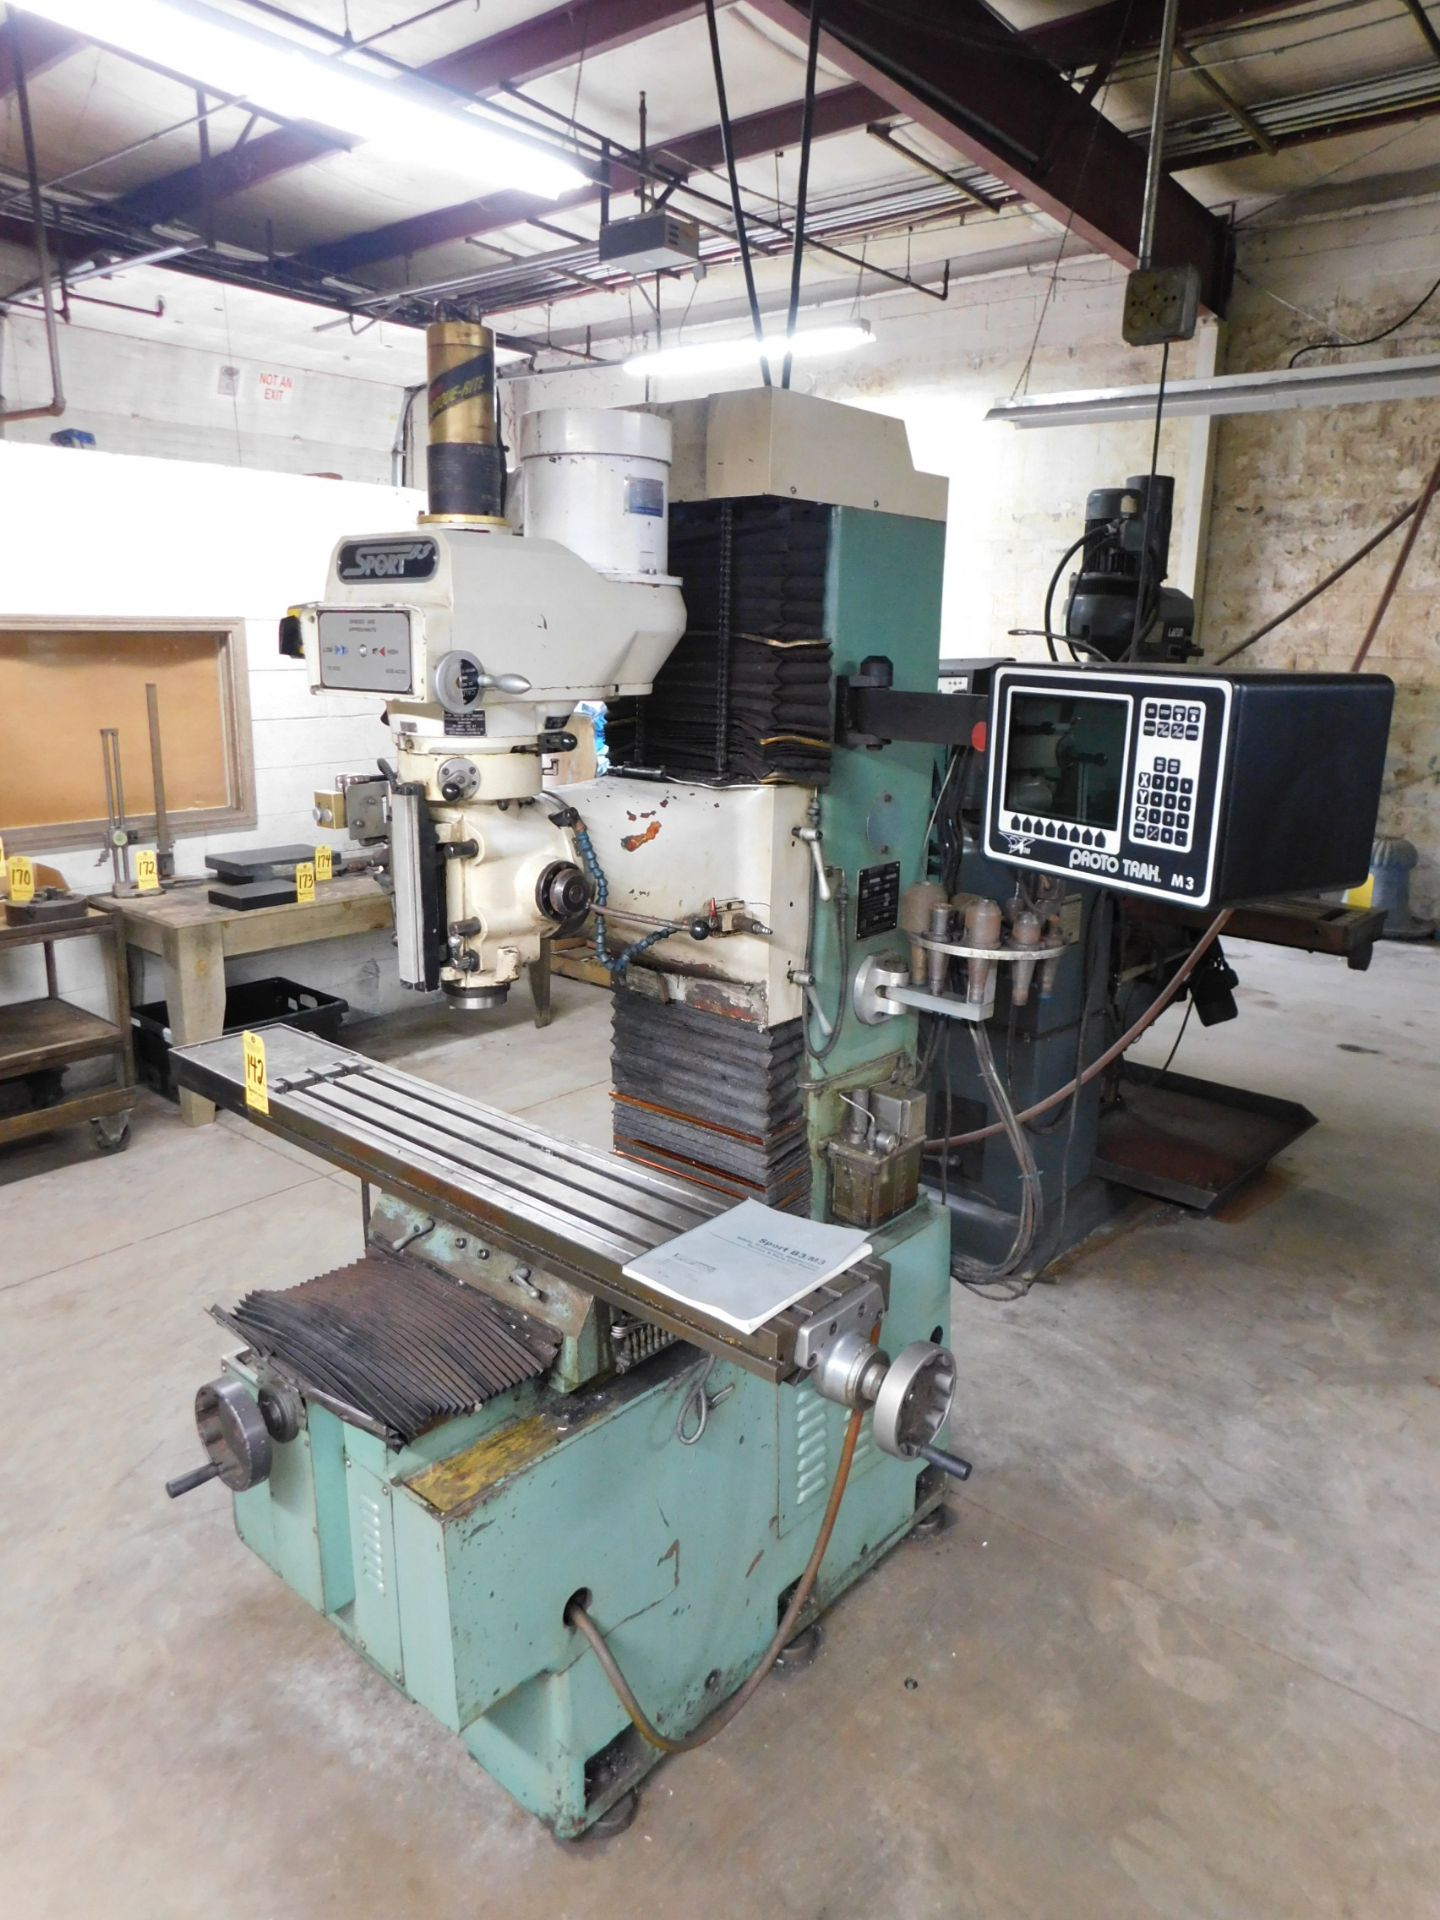 Southwestern Industries Model Sport B3 CNC Vertical Bed Mill, s/n 00-0682, M3 CNC Control, New - Image 4 of 14